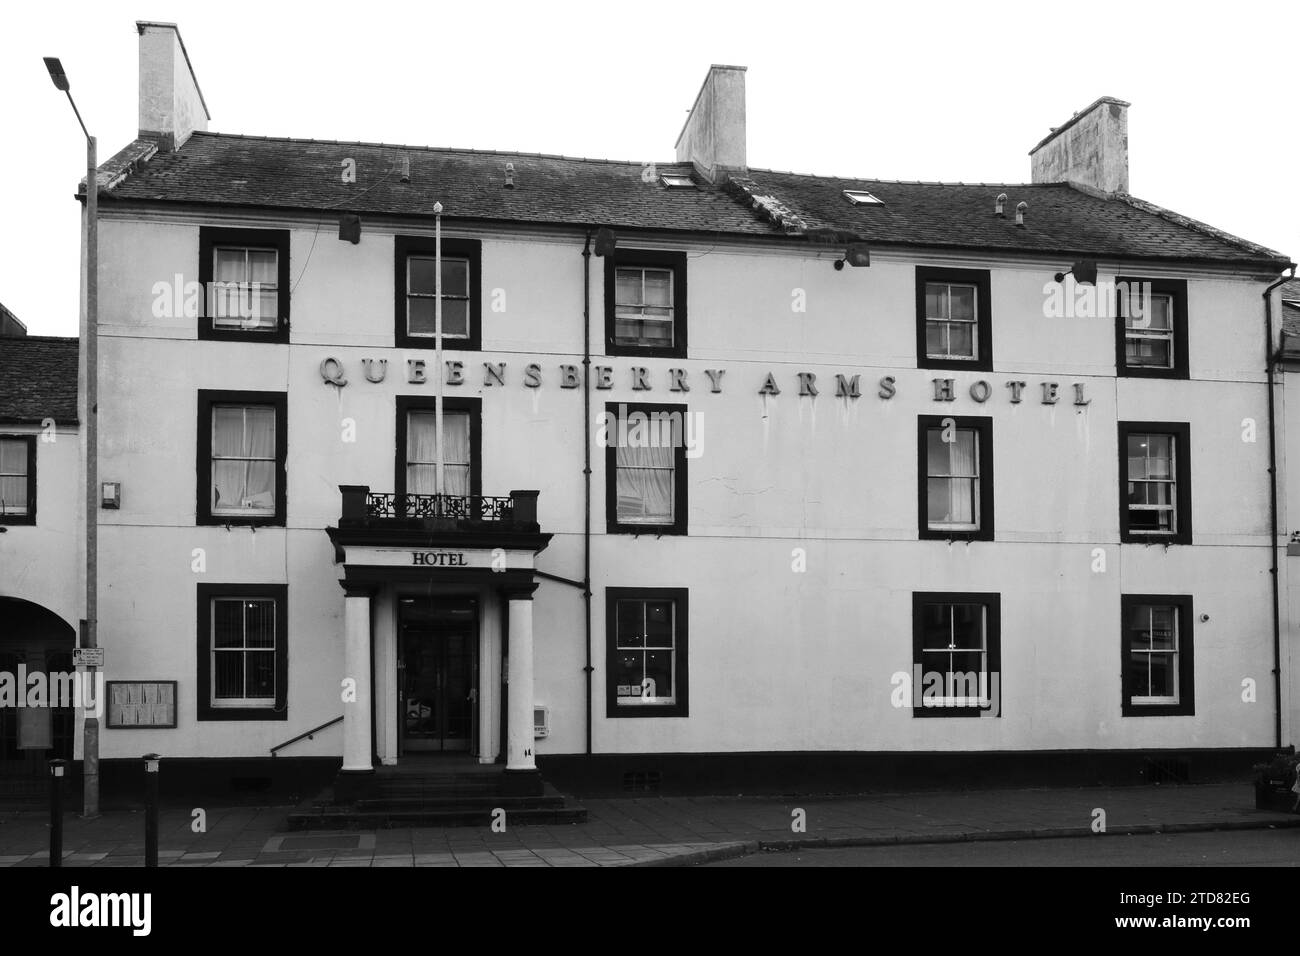 The Queensberry Arms Hotel, Annan town, Dumfries and Galloway, Scotland, UK Stock Photo